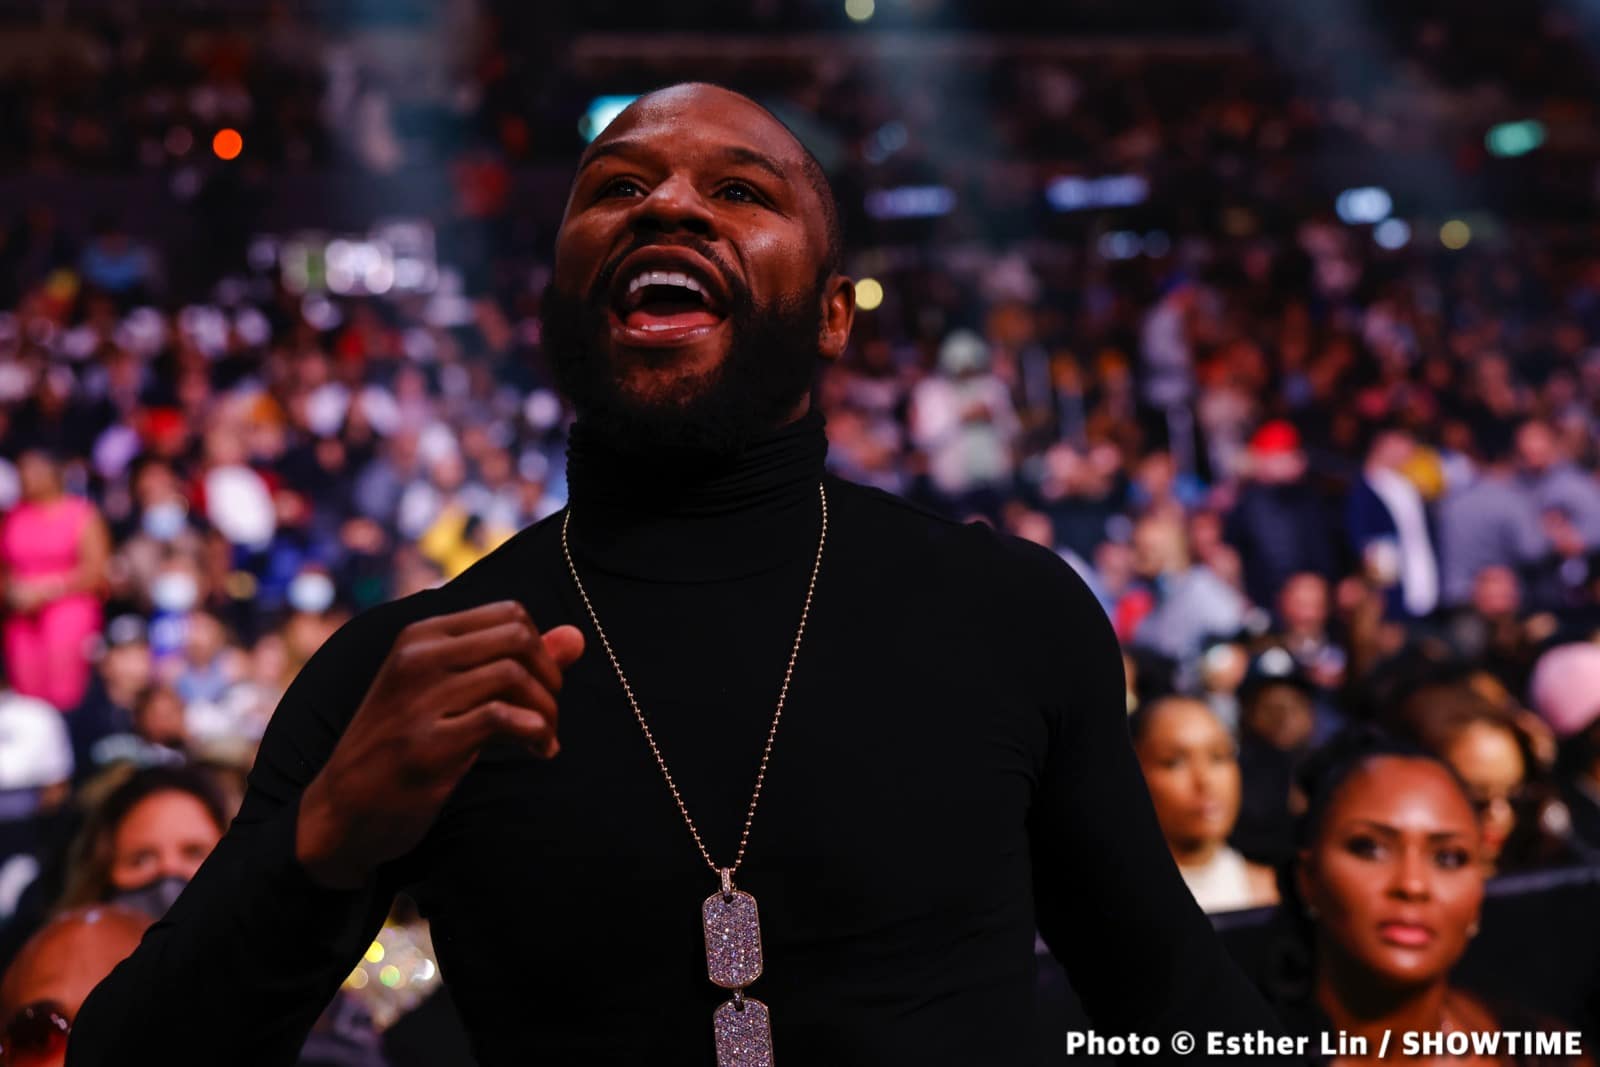 Easy Work For “Money” As Mayweather Stops Youtuber In Sixth Round Of Exhibition Bout